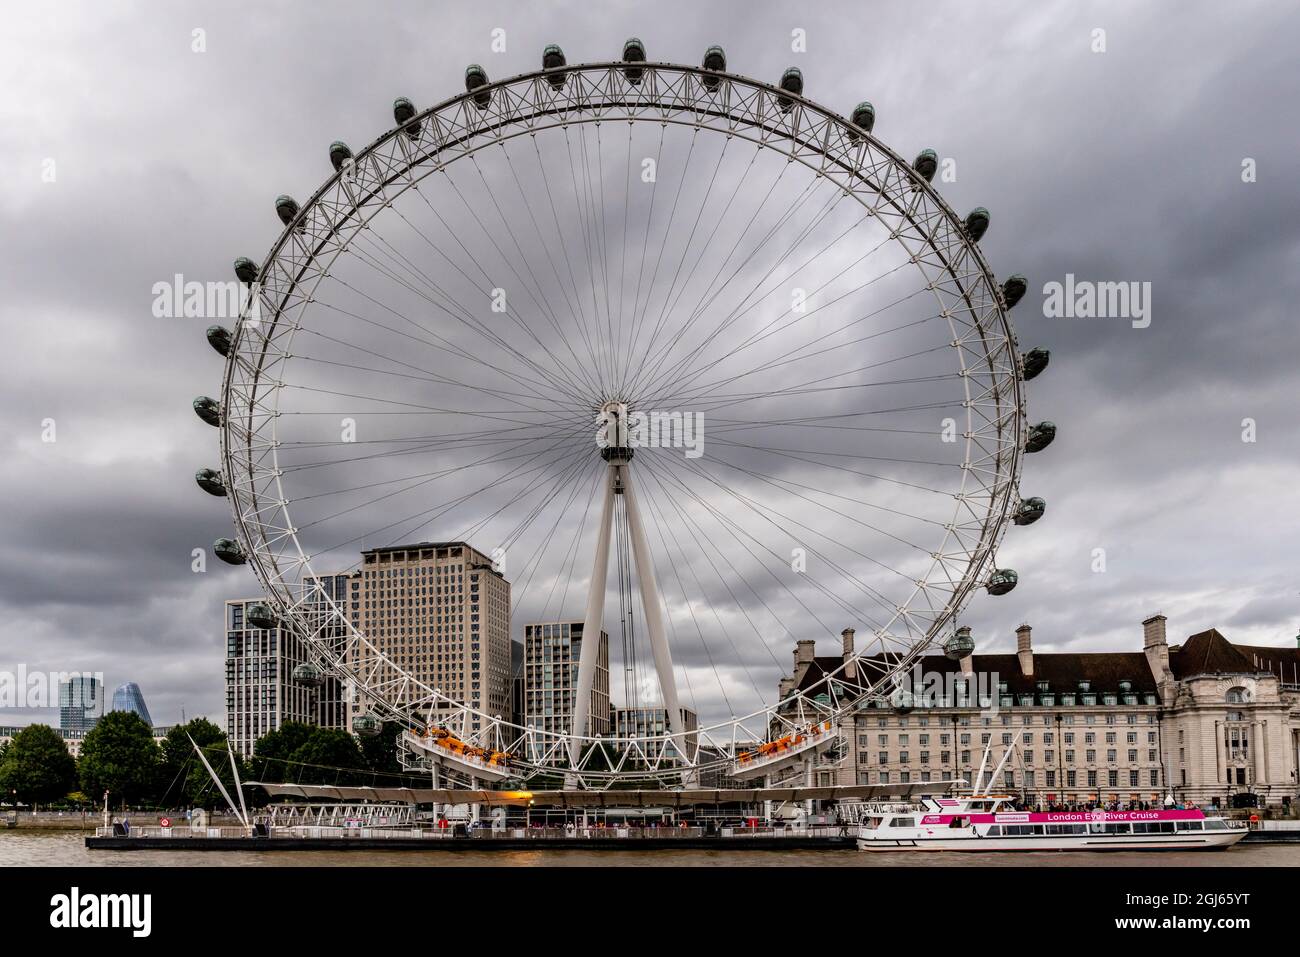 The London Eye and London Eye River Cruise Boat On A Cloudy Day, London, UK. Stock Photo